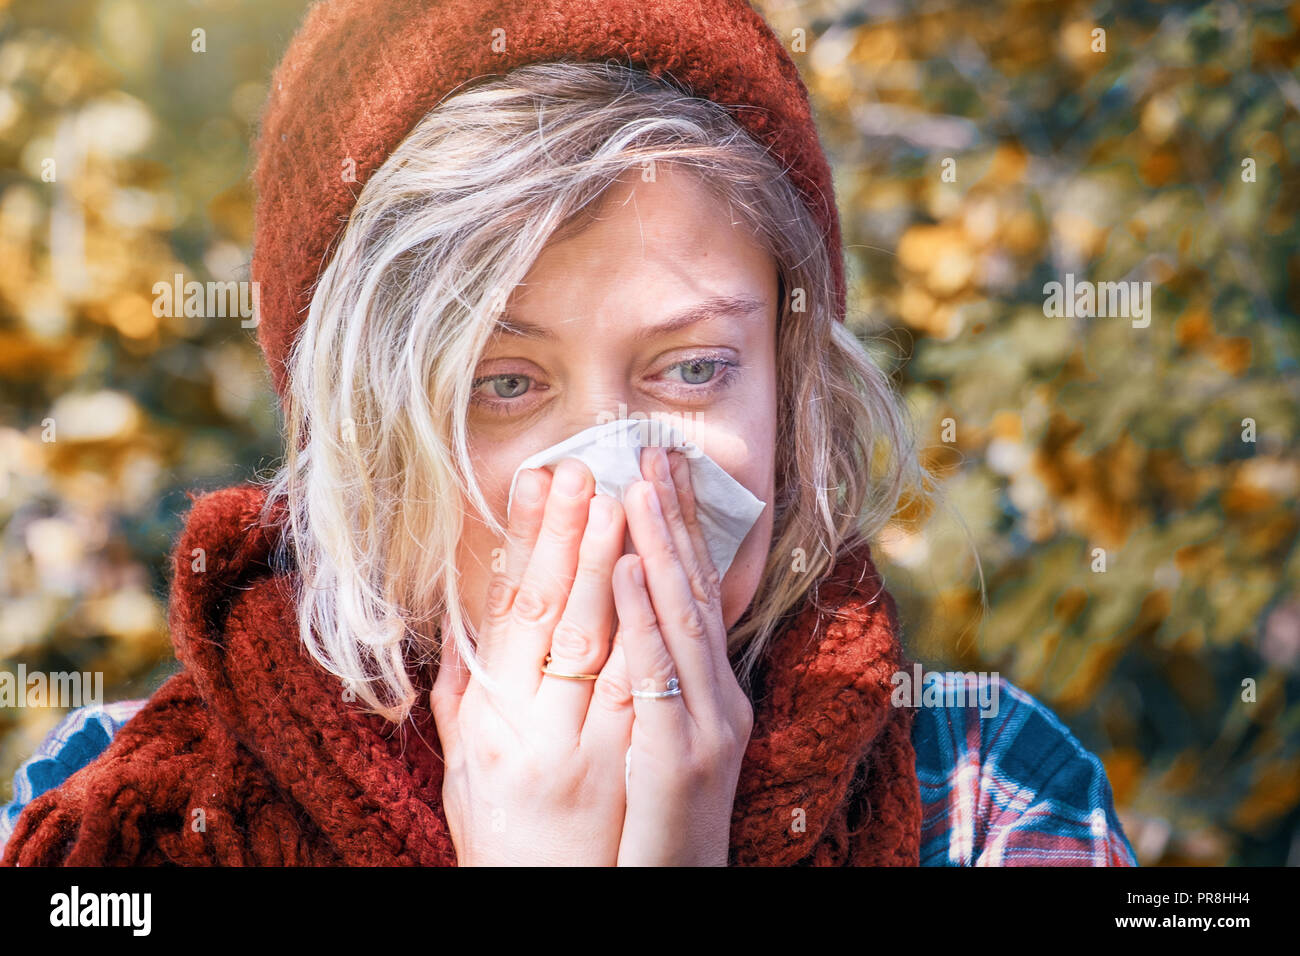 Girl feeling sick blowing nose outdoor in the park Stock Photo